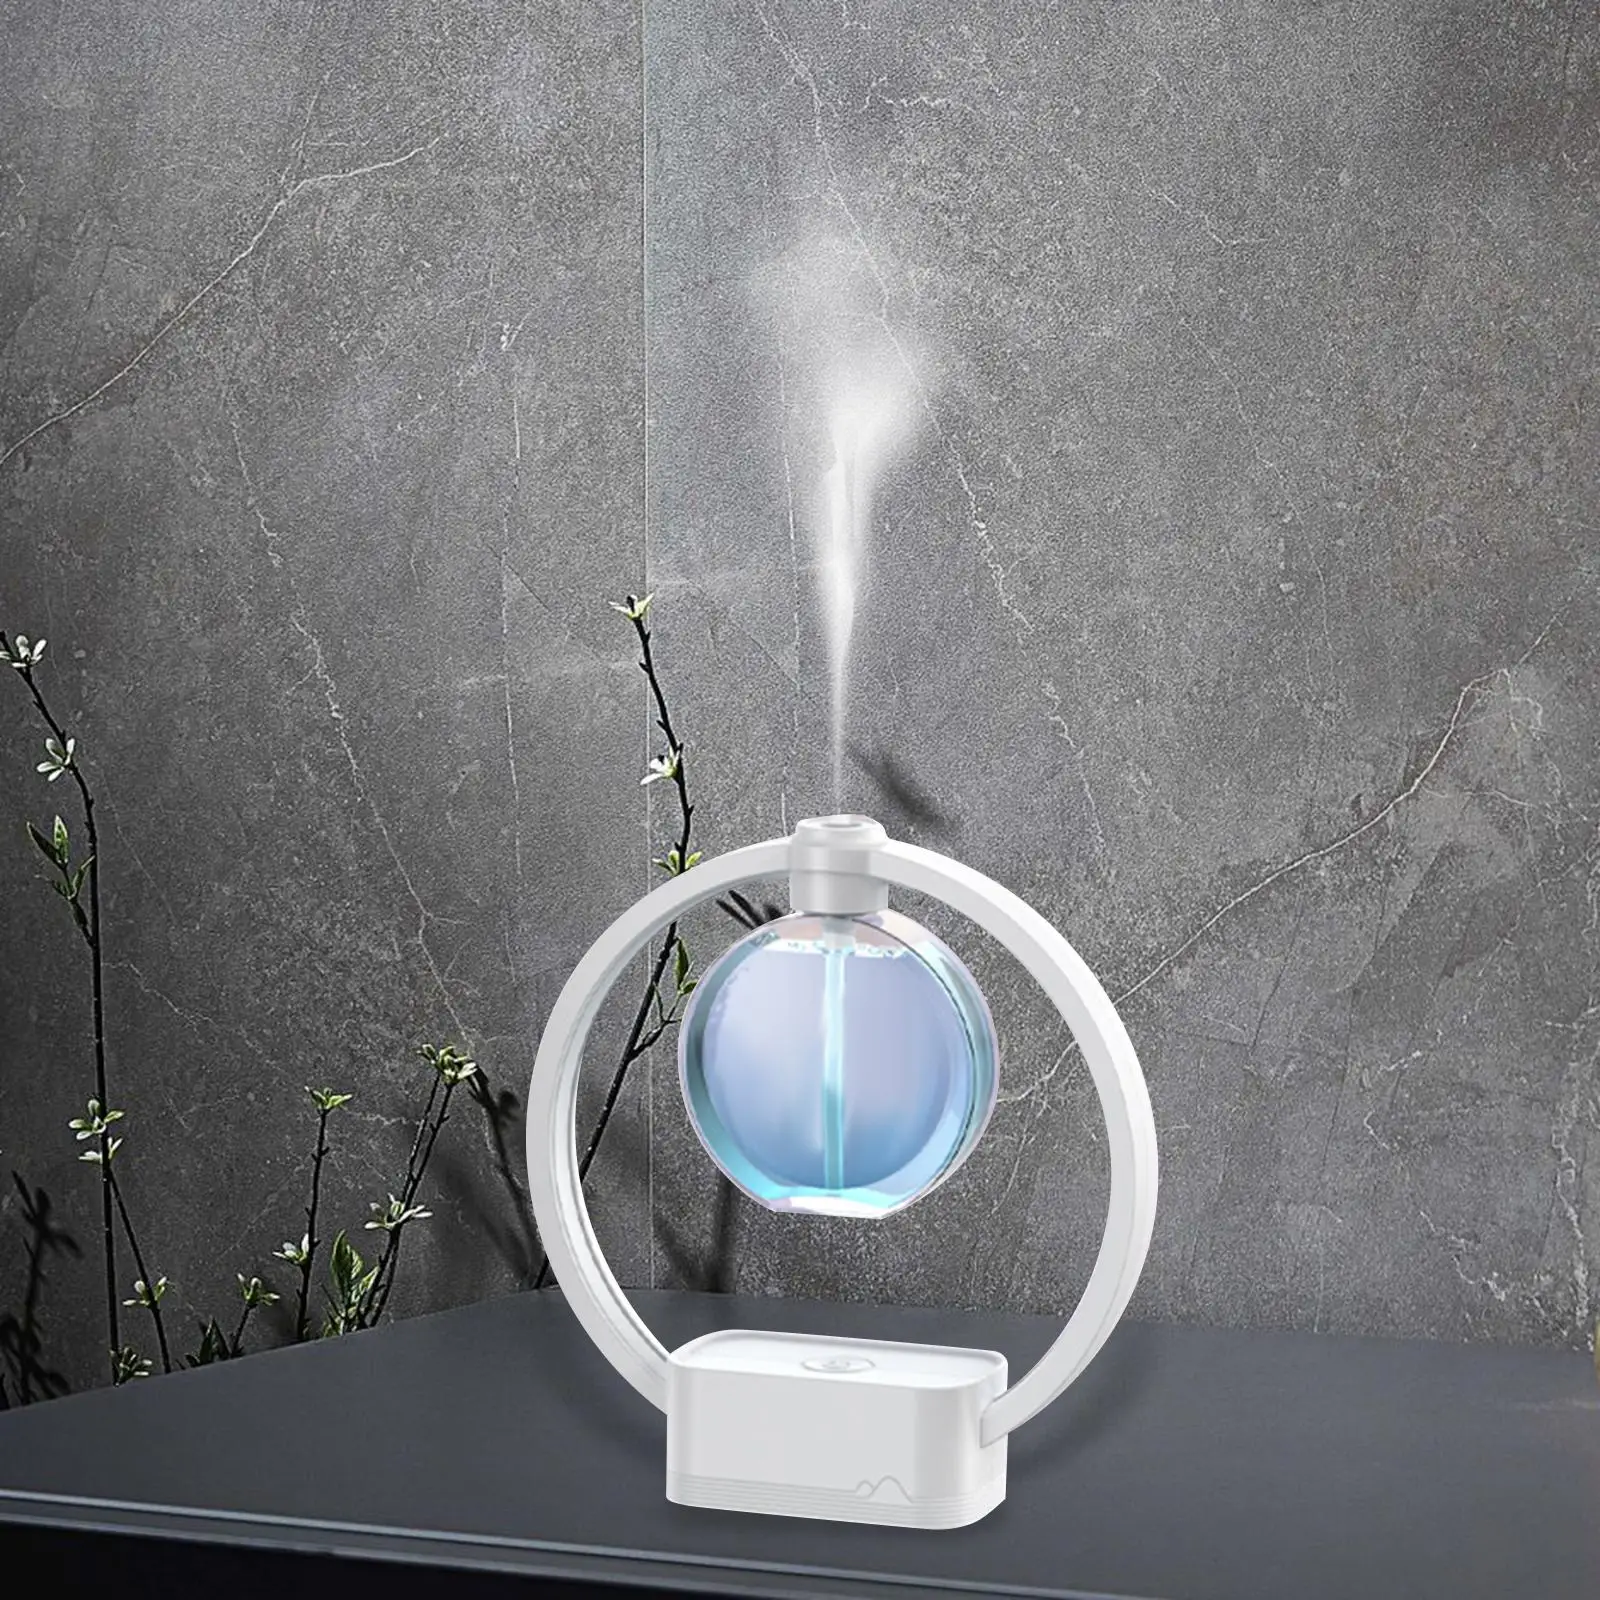 Essential Oil Diffuser Wall Mount Free Standing Noiseless 6 Level Adjustment Diffuser for Clubs Shop Hotel Spa